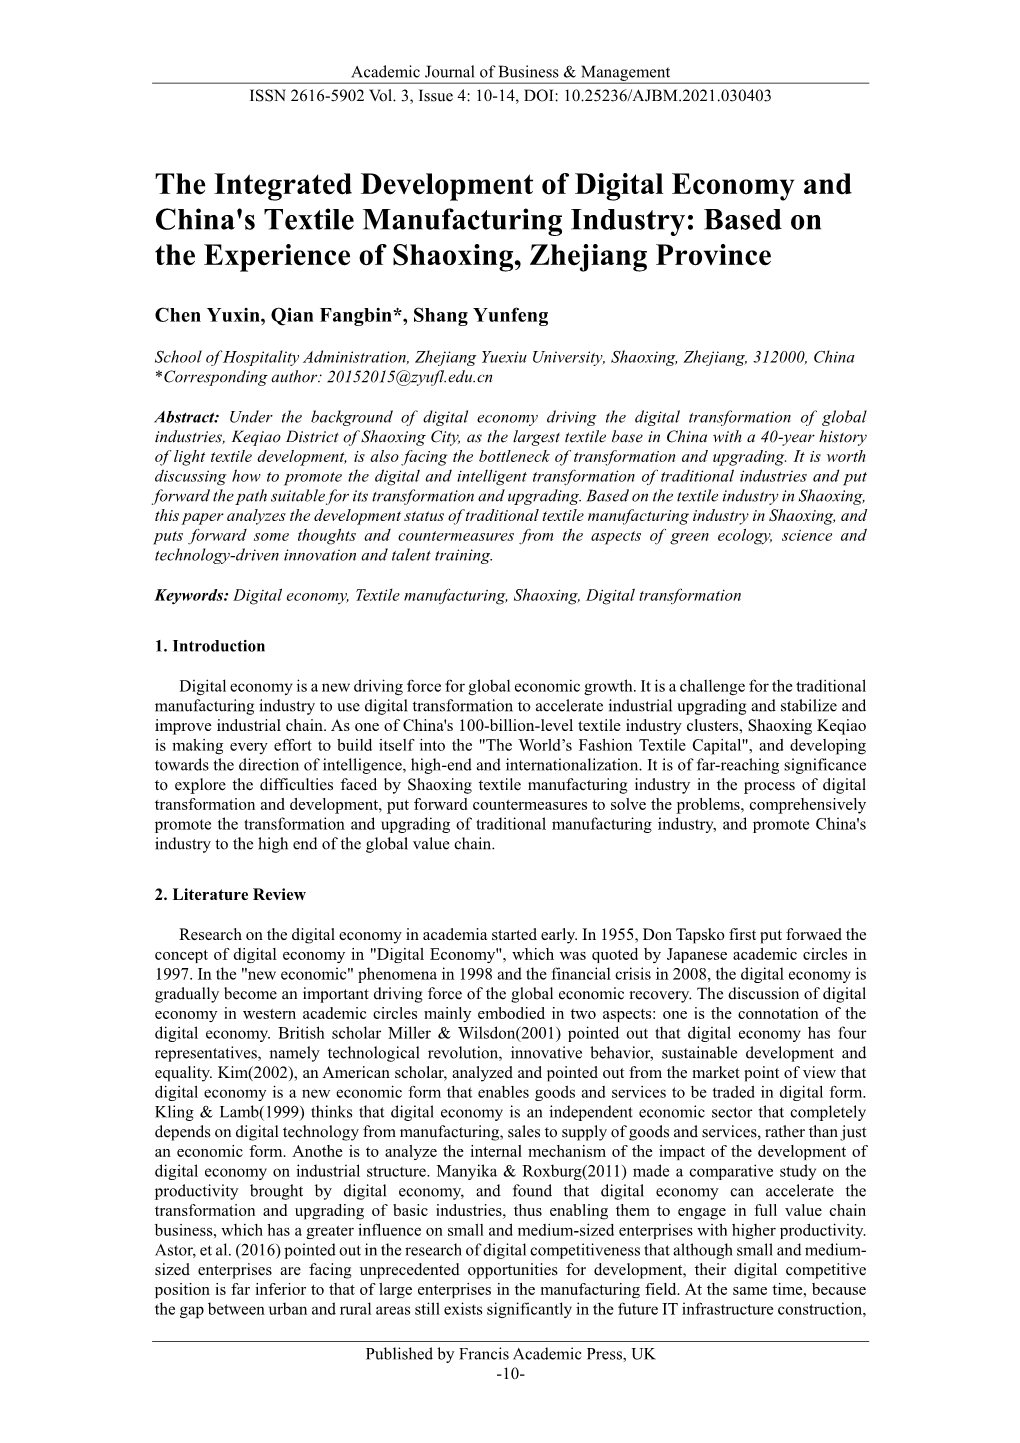 The Integrated Development of Digital Economy and China's Textile Manufacturing Industry: Based on the Experience of Shaoxing, Zhejiang Province